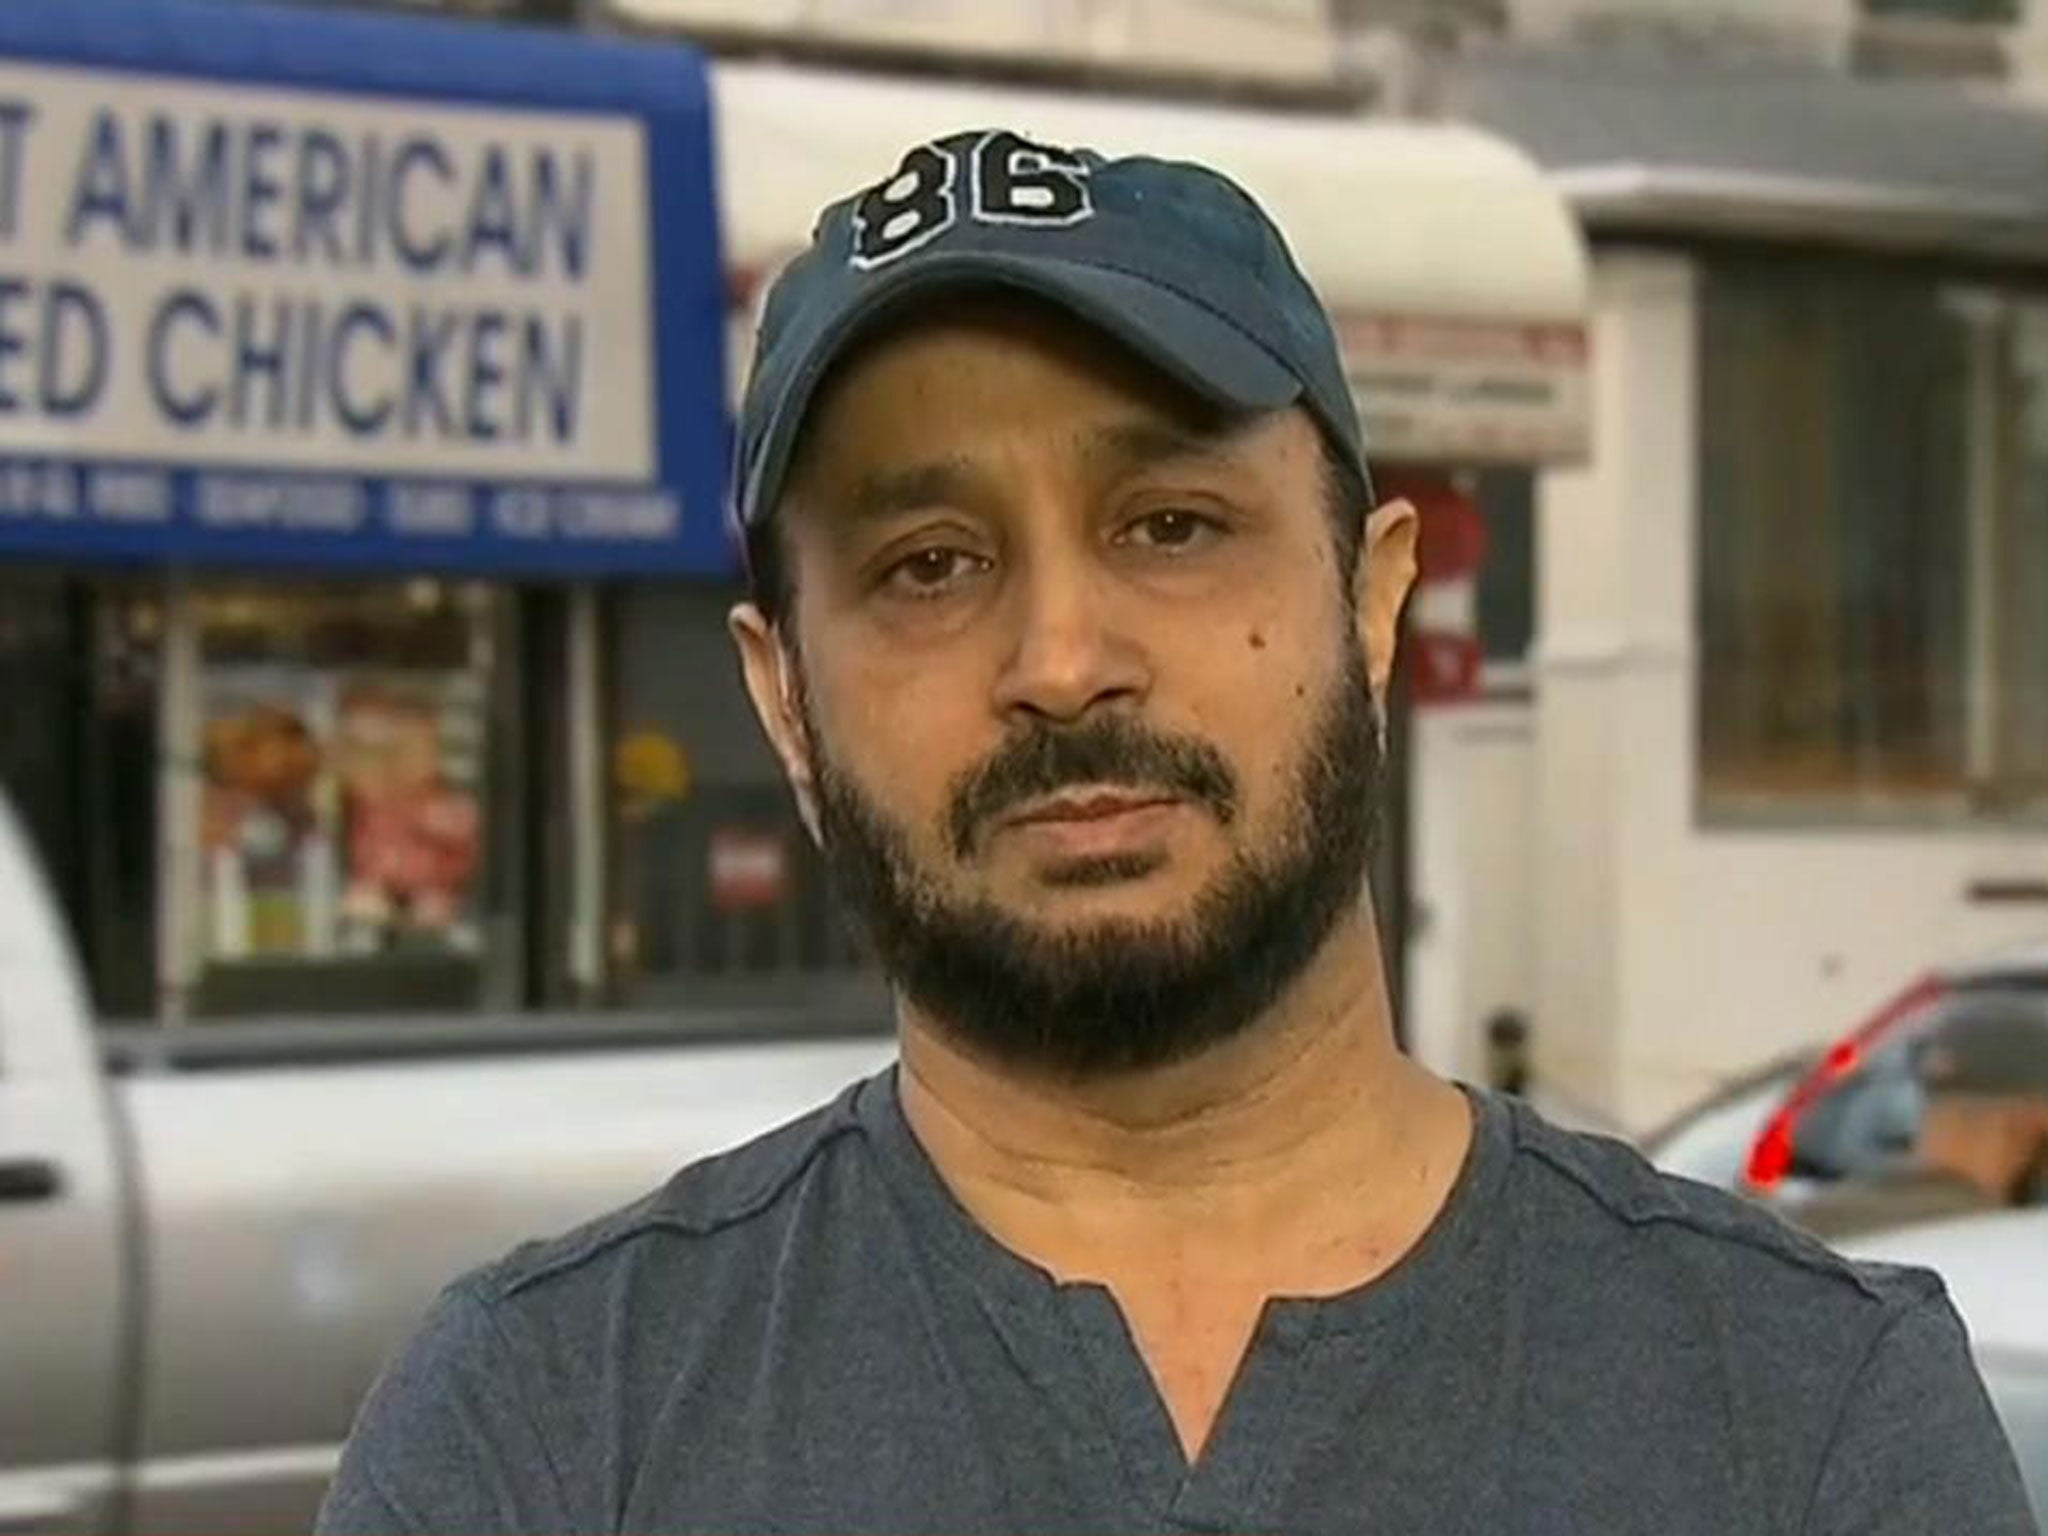 Harinder Bains, a bar owner in Linden, New Jersey, who led police to the New York bombing suspect